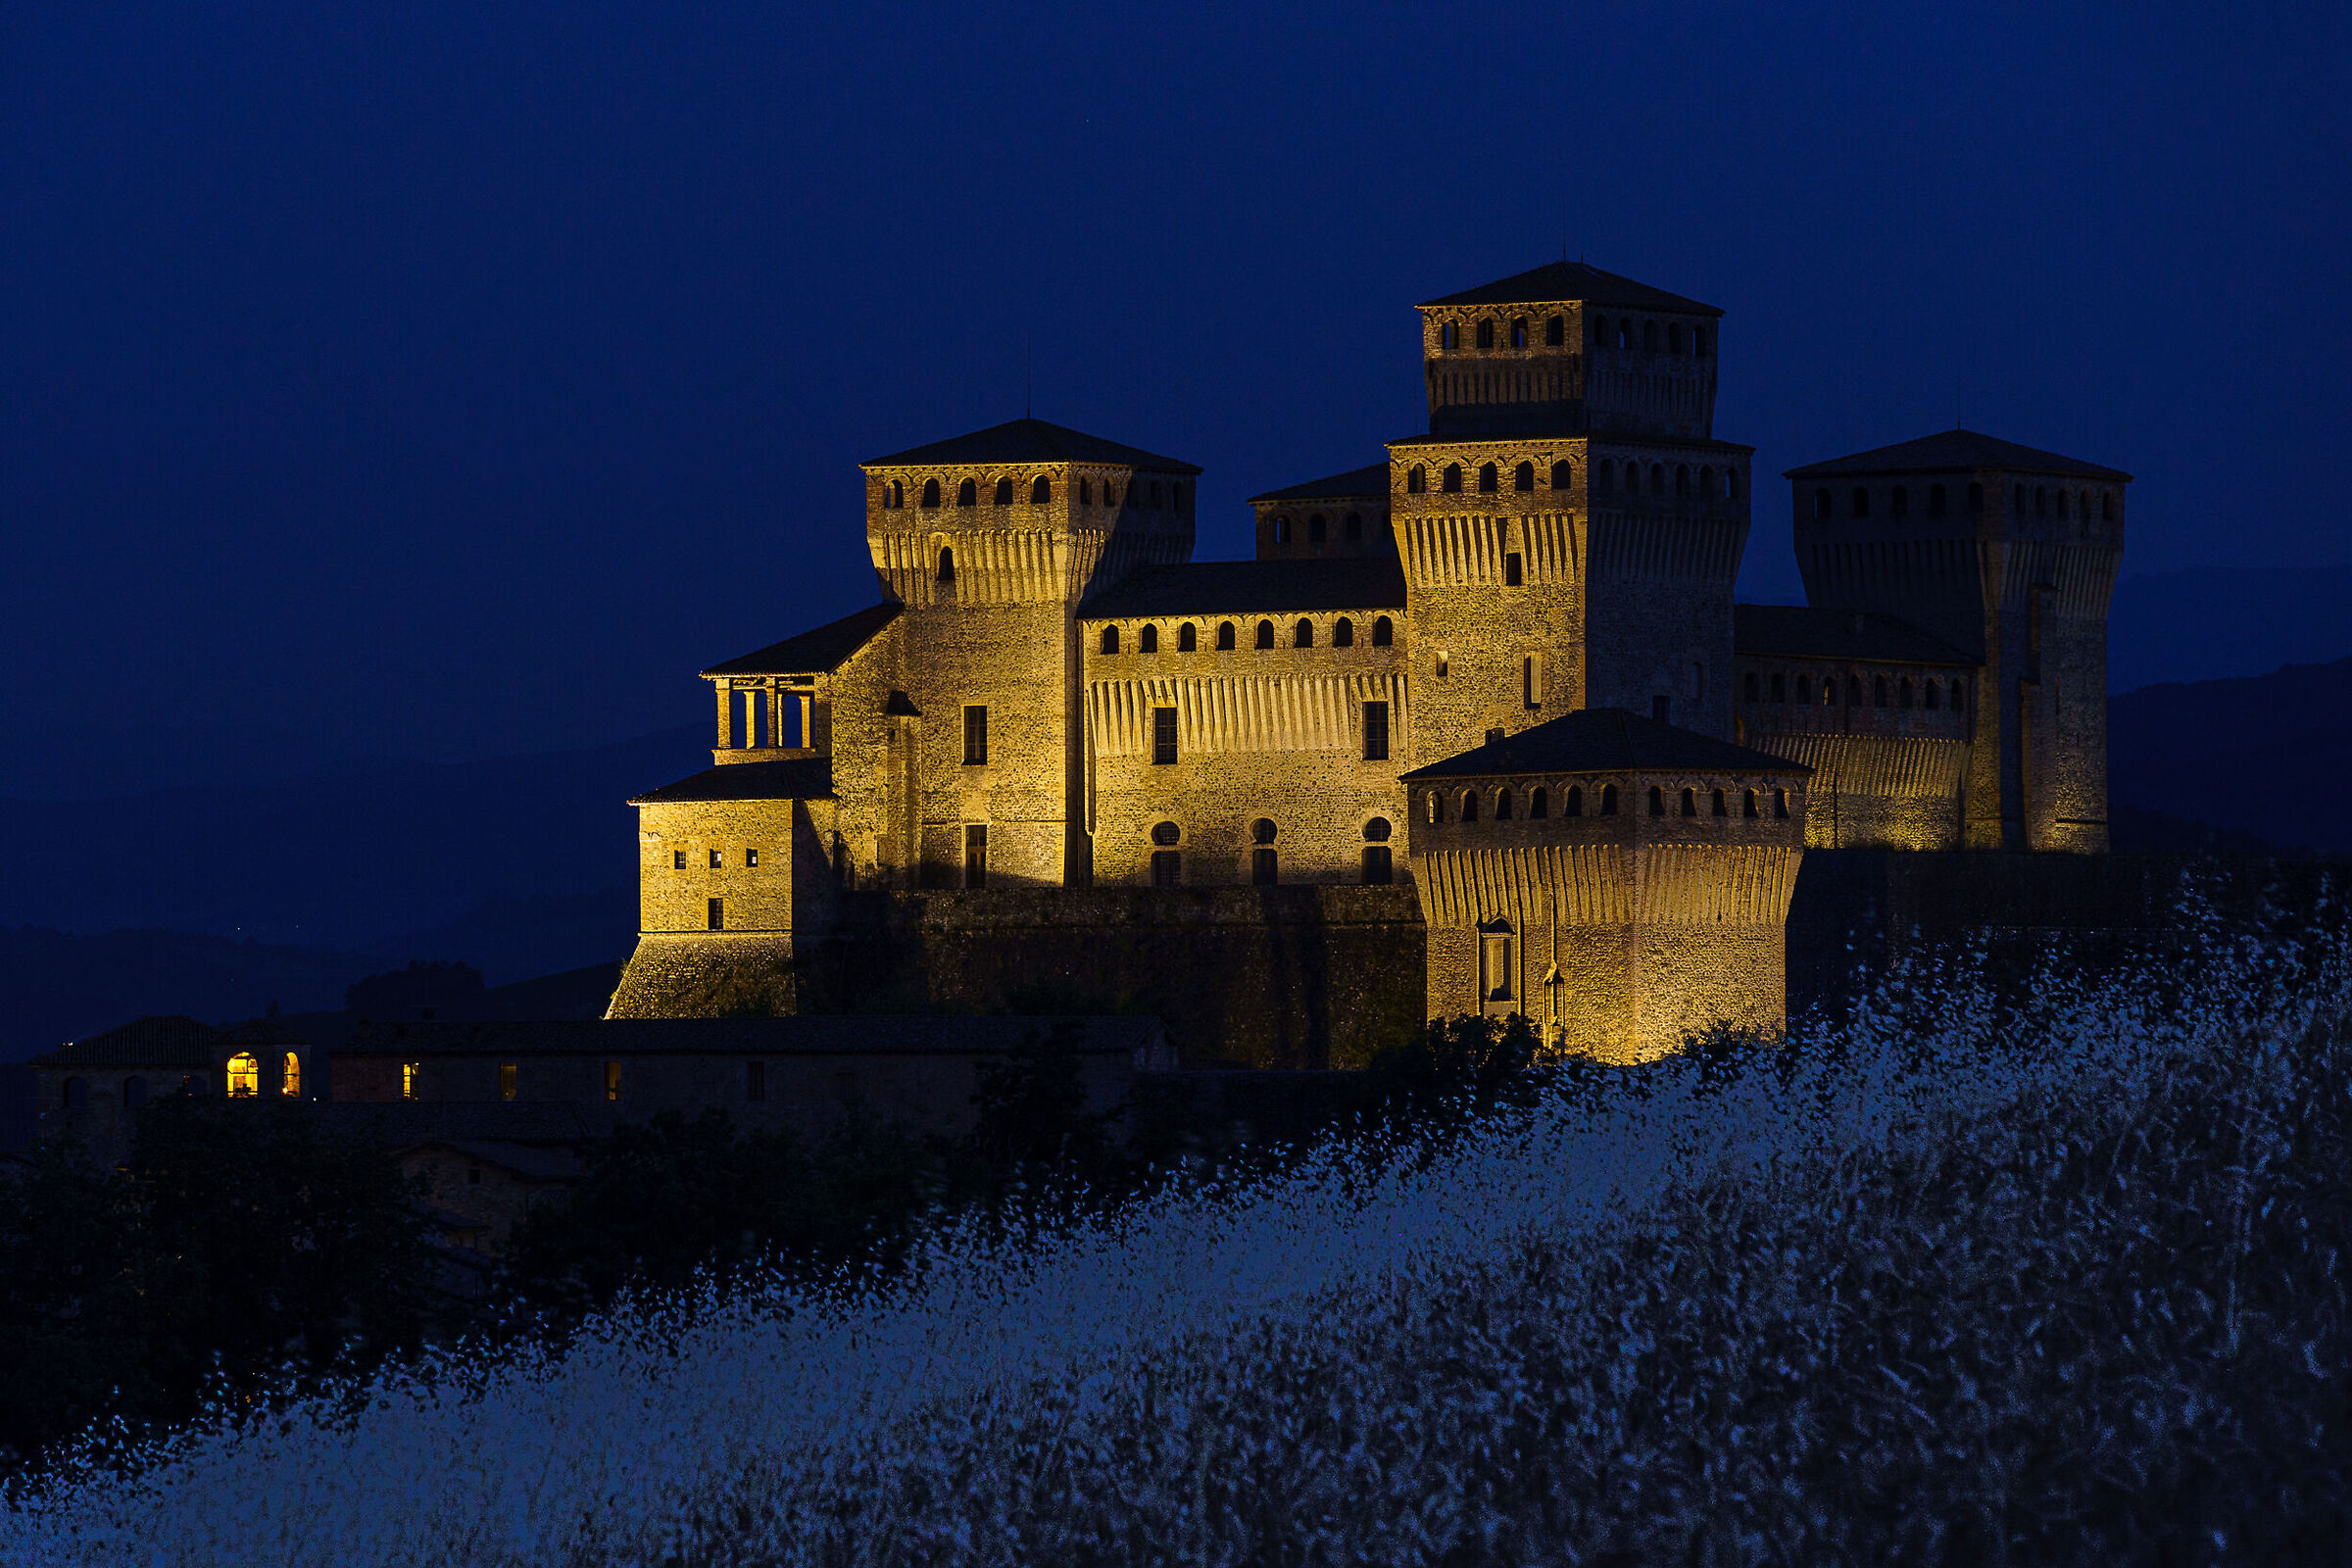 The Castle of Bianca and Pier Maria...